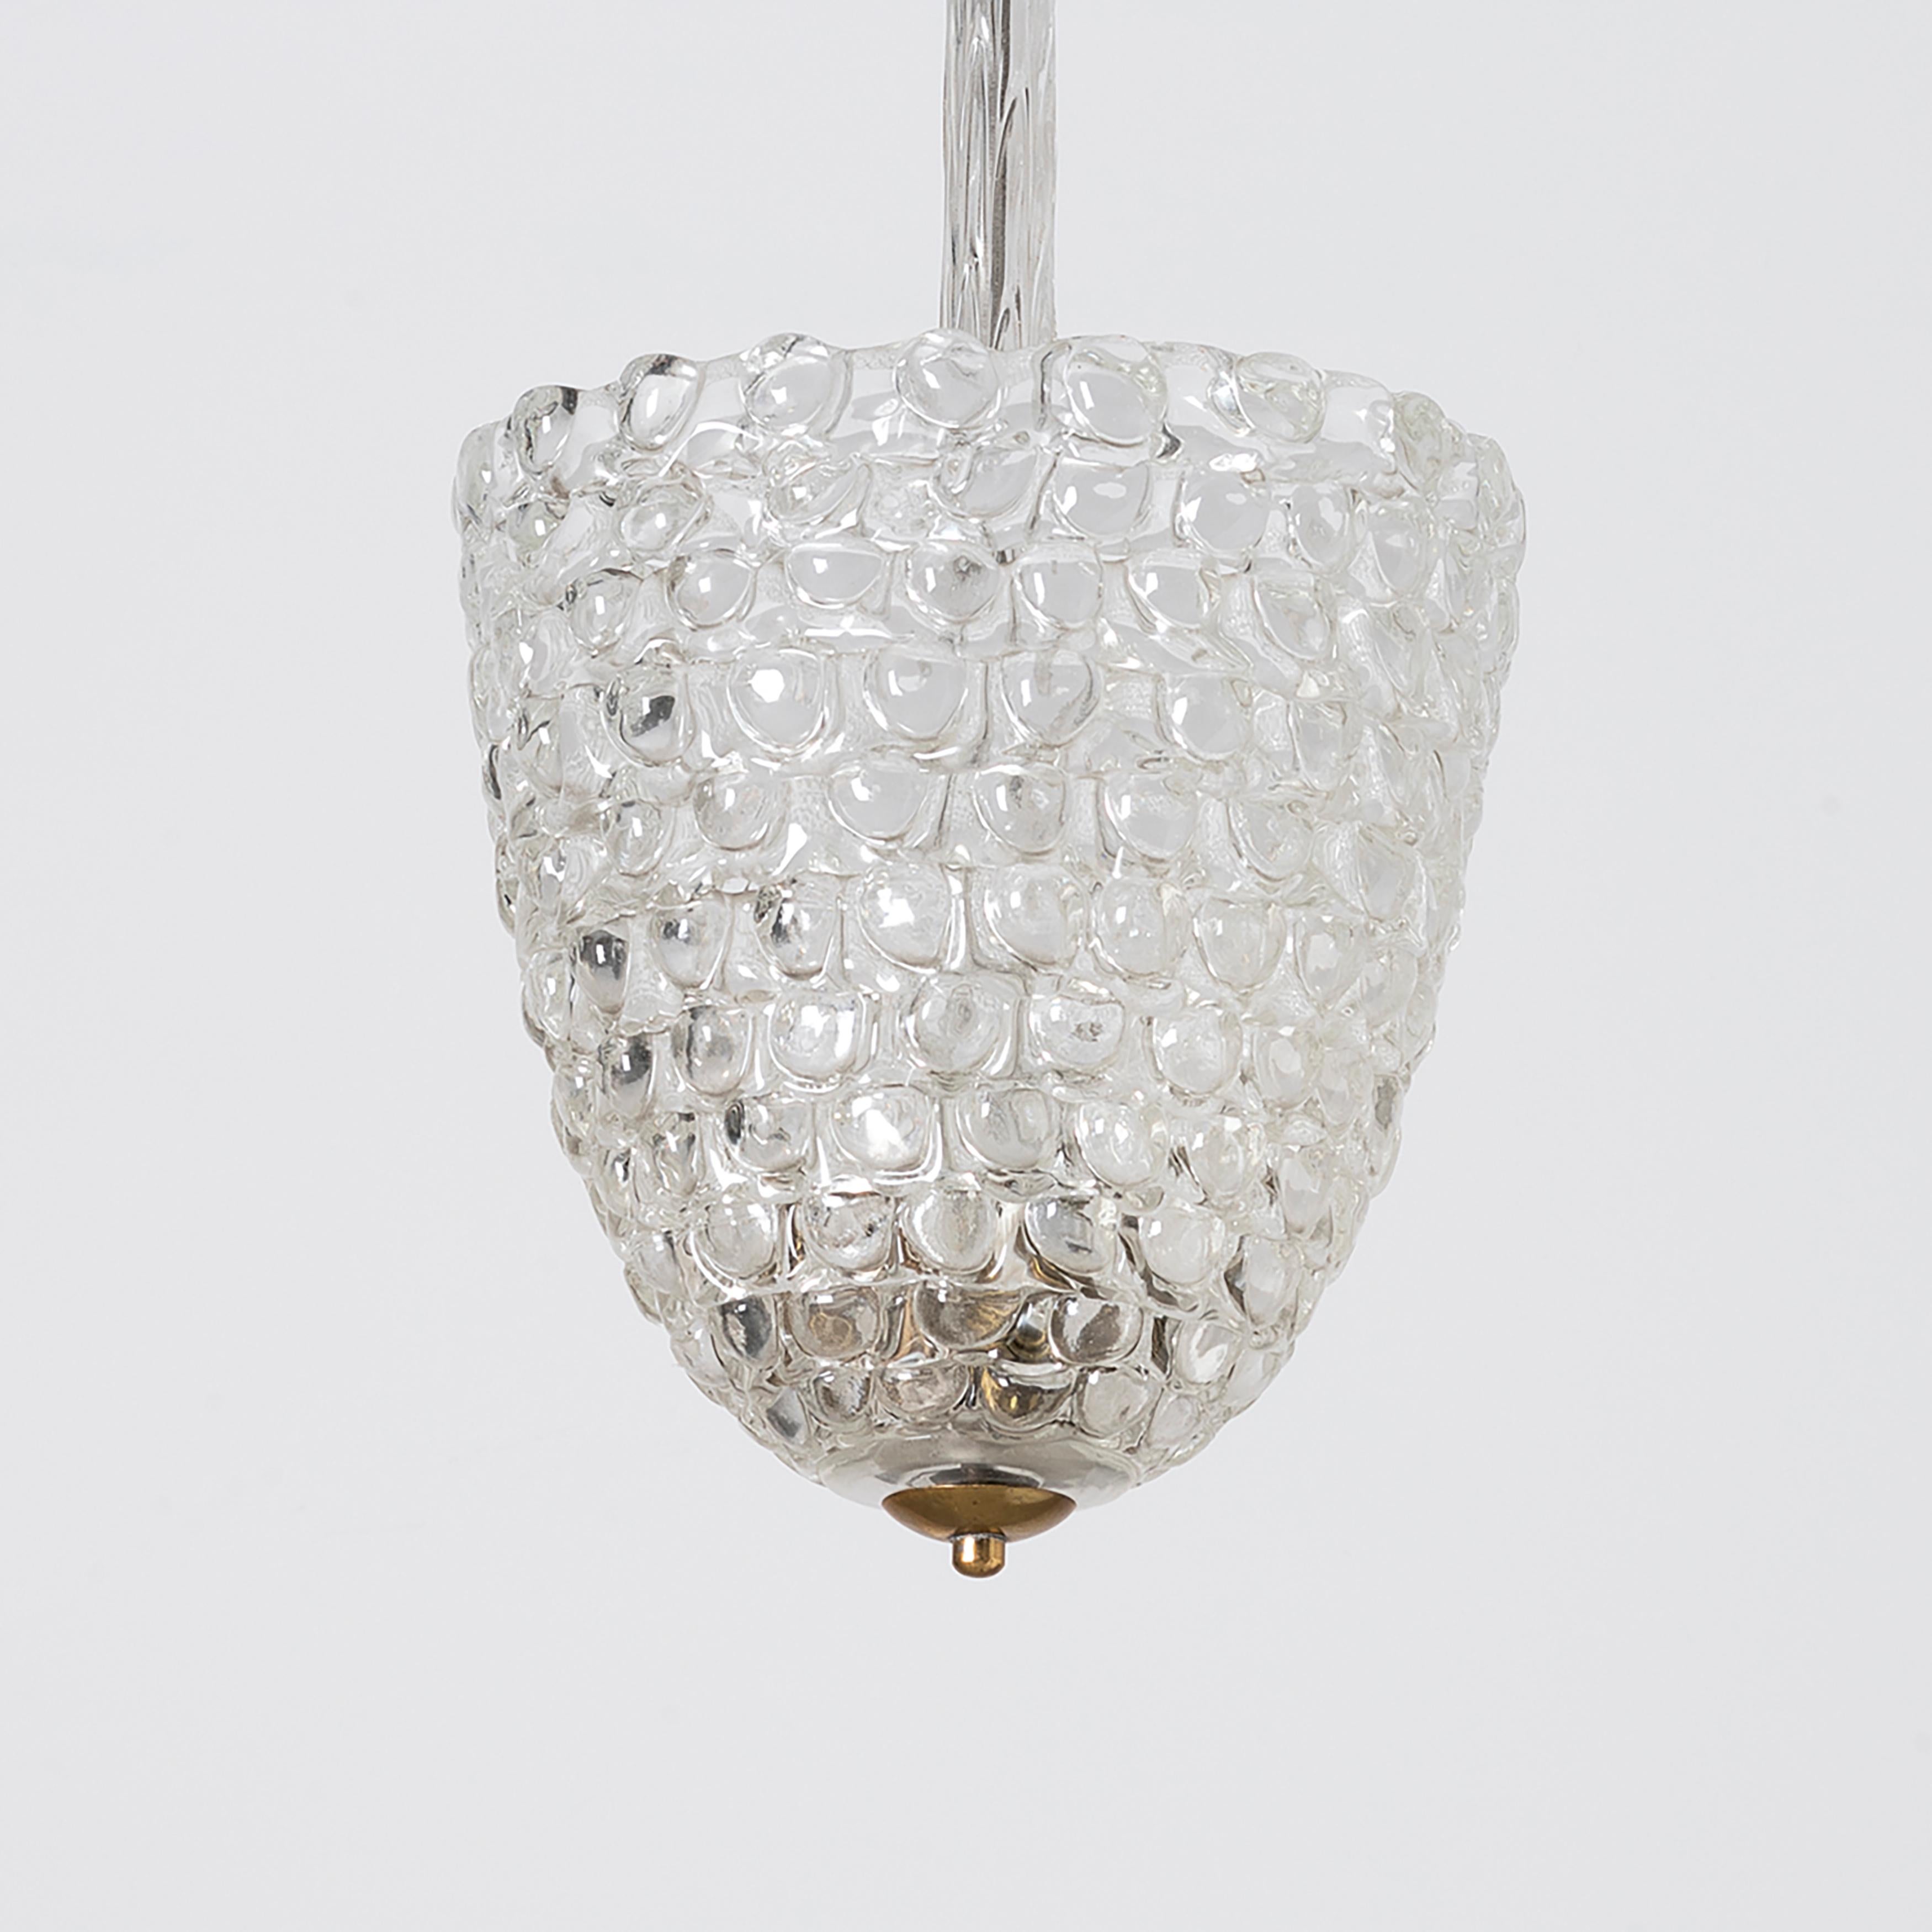 Ercole Barovier elegant and rare clear crystal glass chandelier from Lenti series with semi-spherical applications, glass stem and matching canopy. This crystal glass chandelier with thick fused lentils when lit emits a brilliant patterned